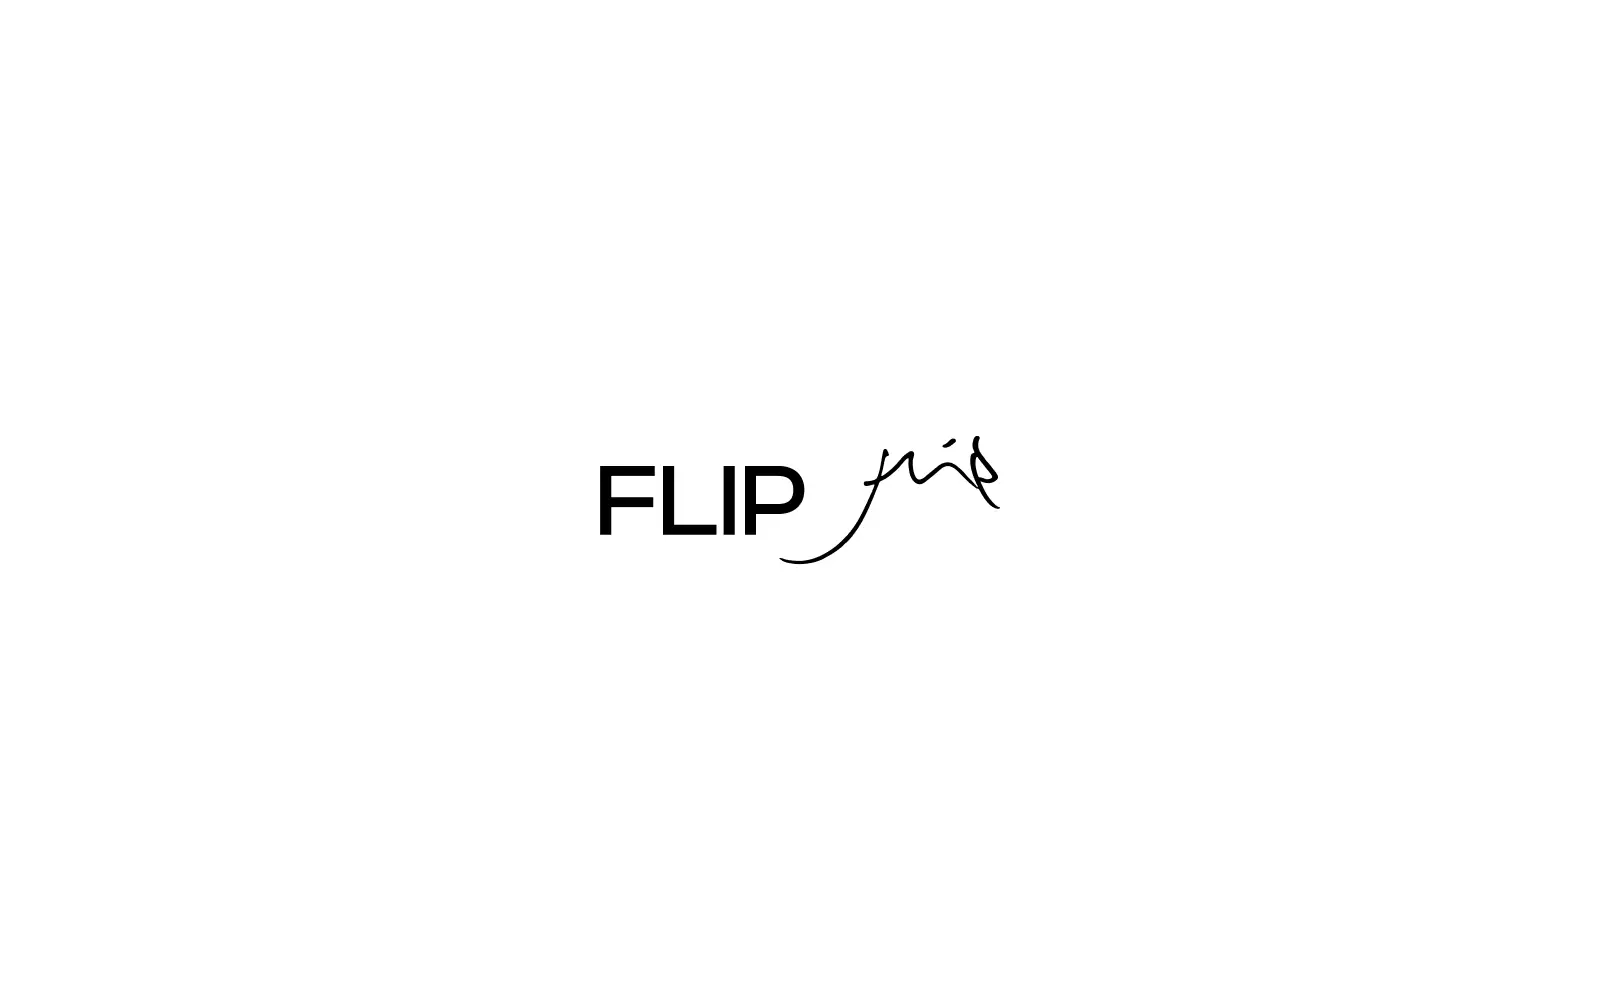 Japanese style logo for client FLIP expressing an aesthetic mind